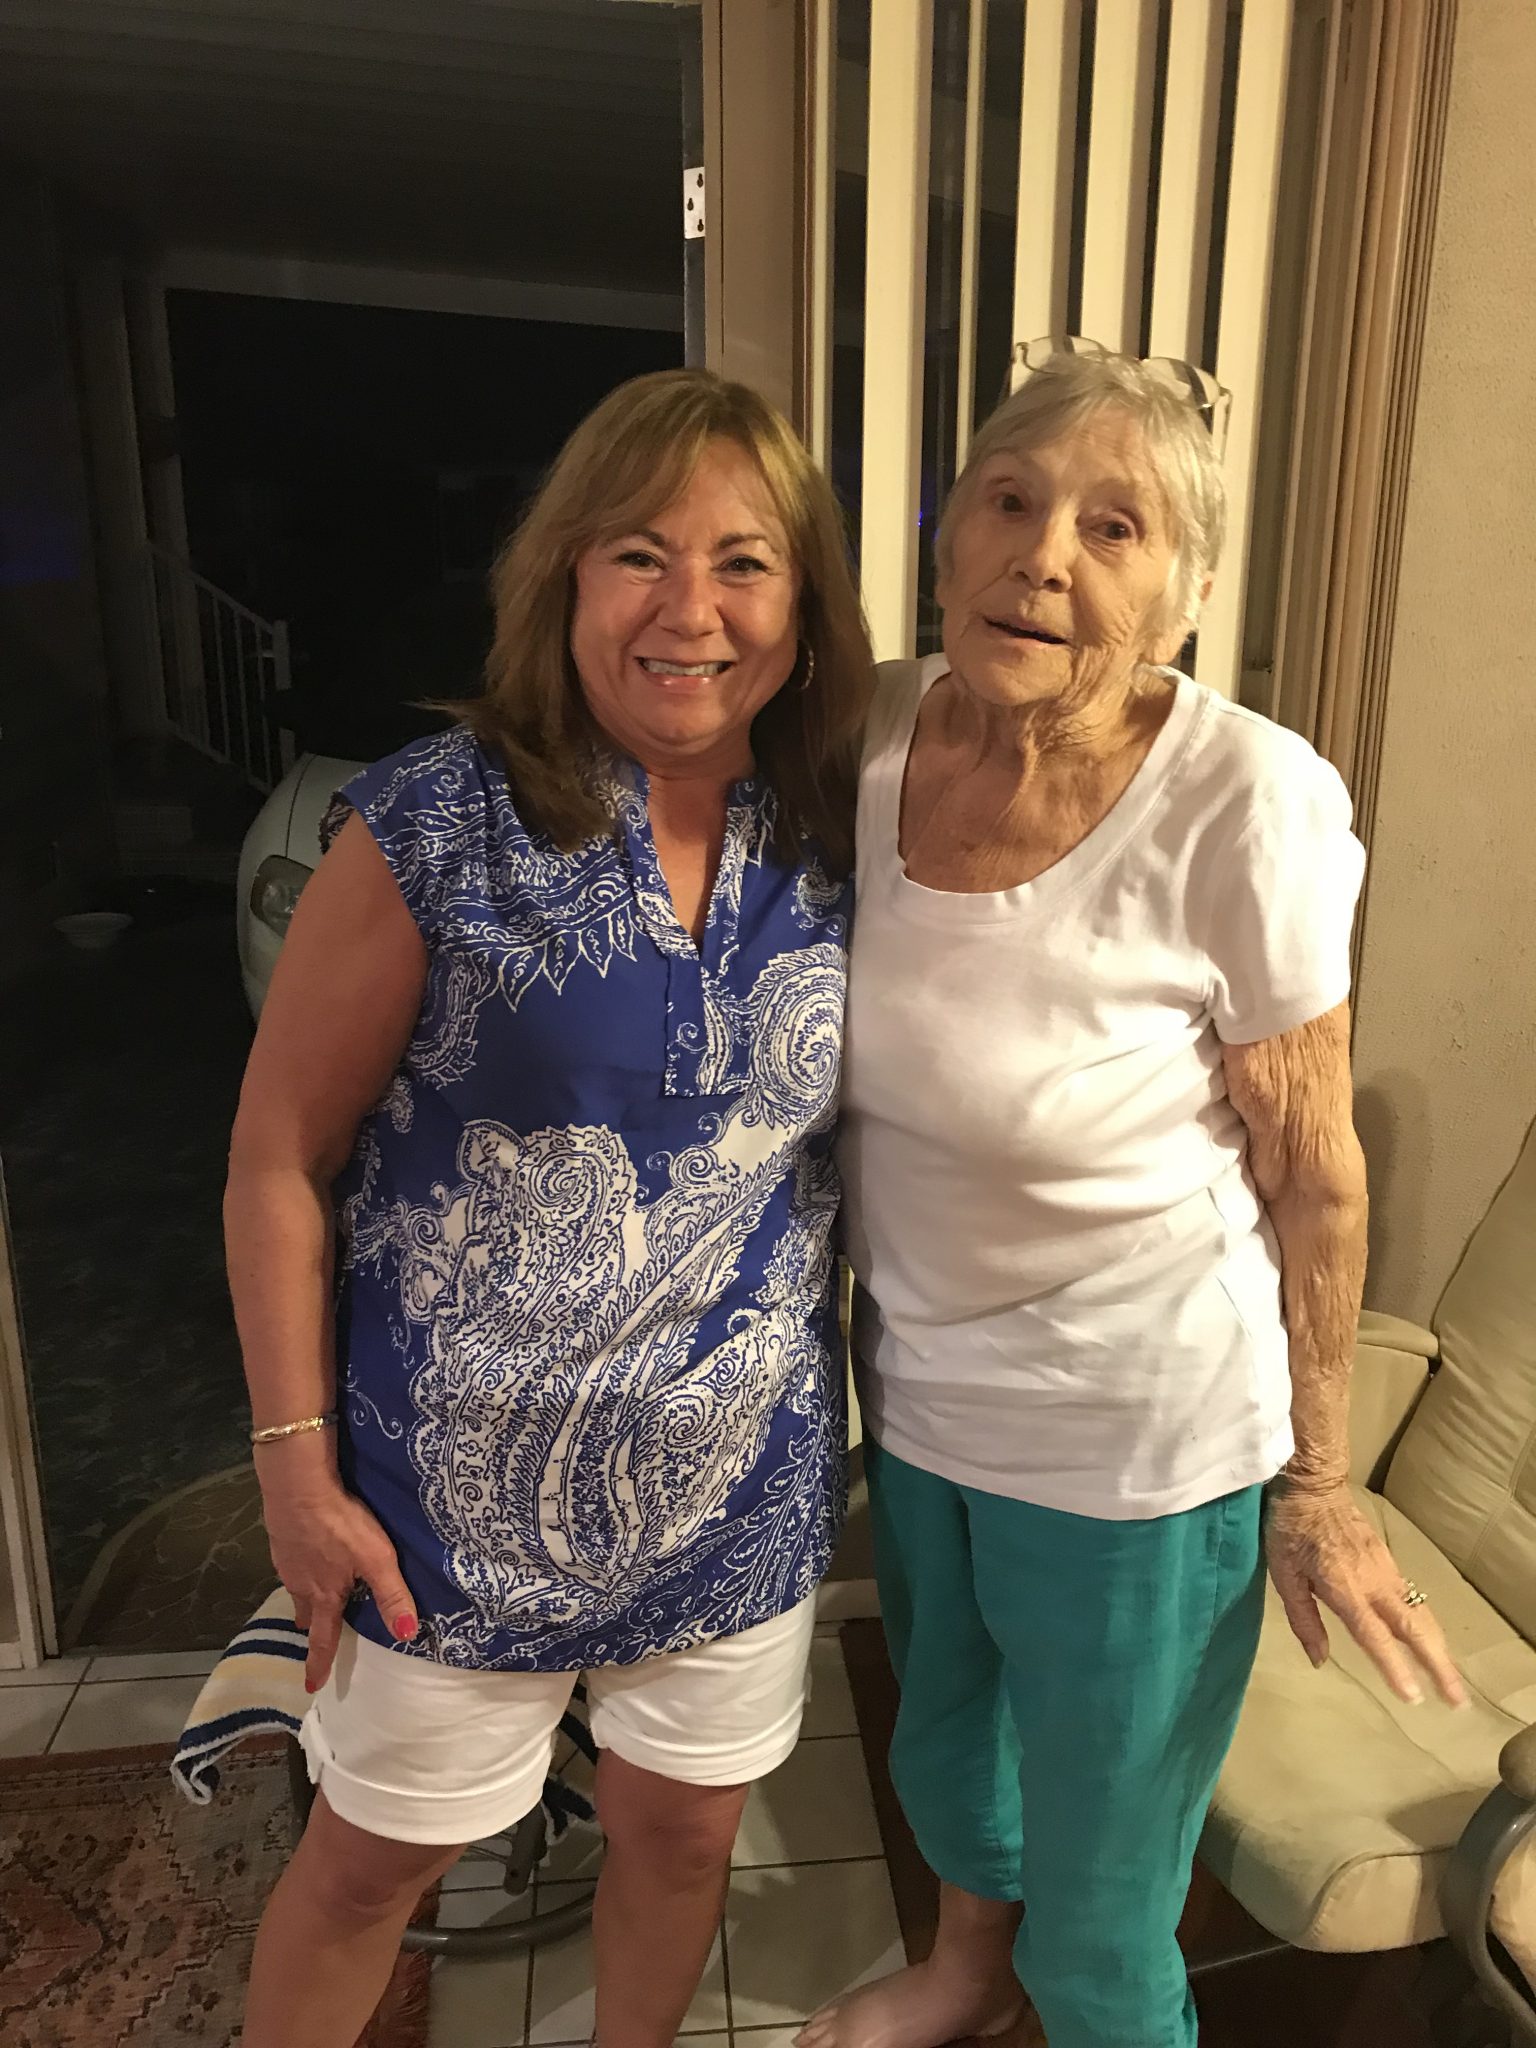 Sylvia and daughter Pam on her 81st birthday February 20, 2018